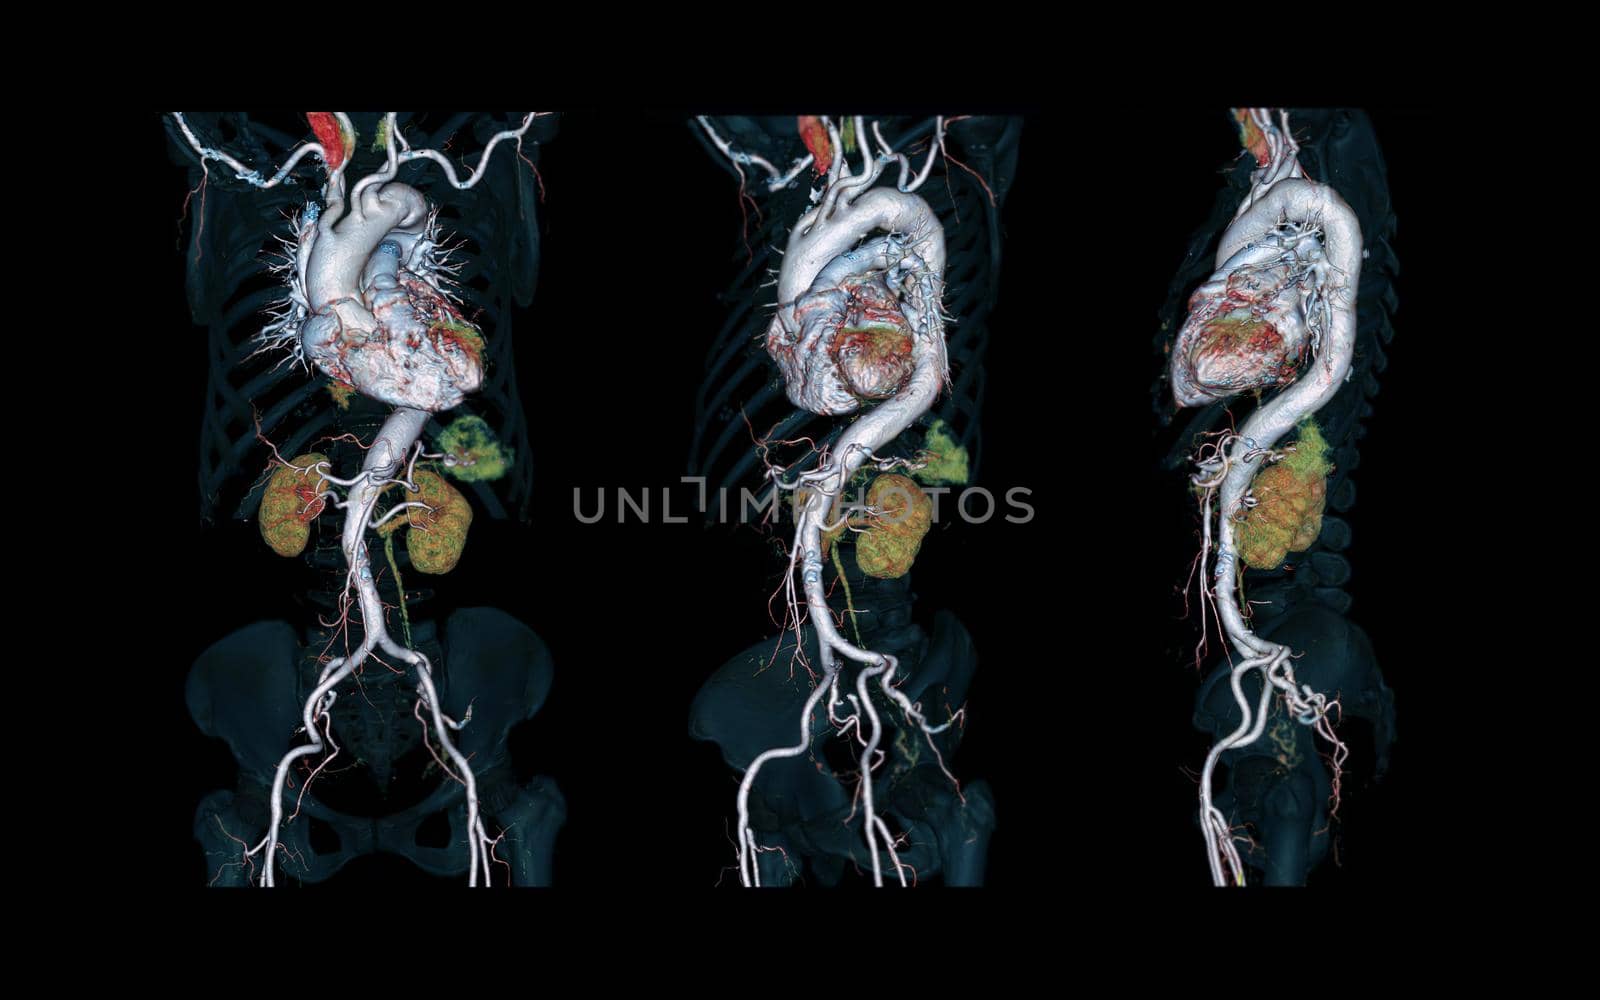 CTA Whole aorta 3D rendering image on black background for detect aortic aneurysm.